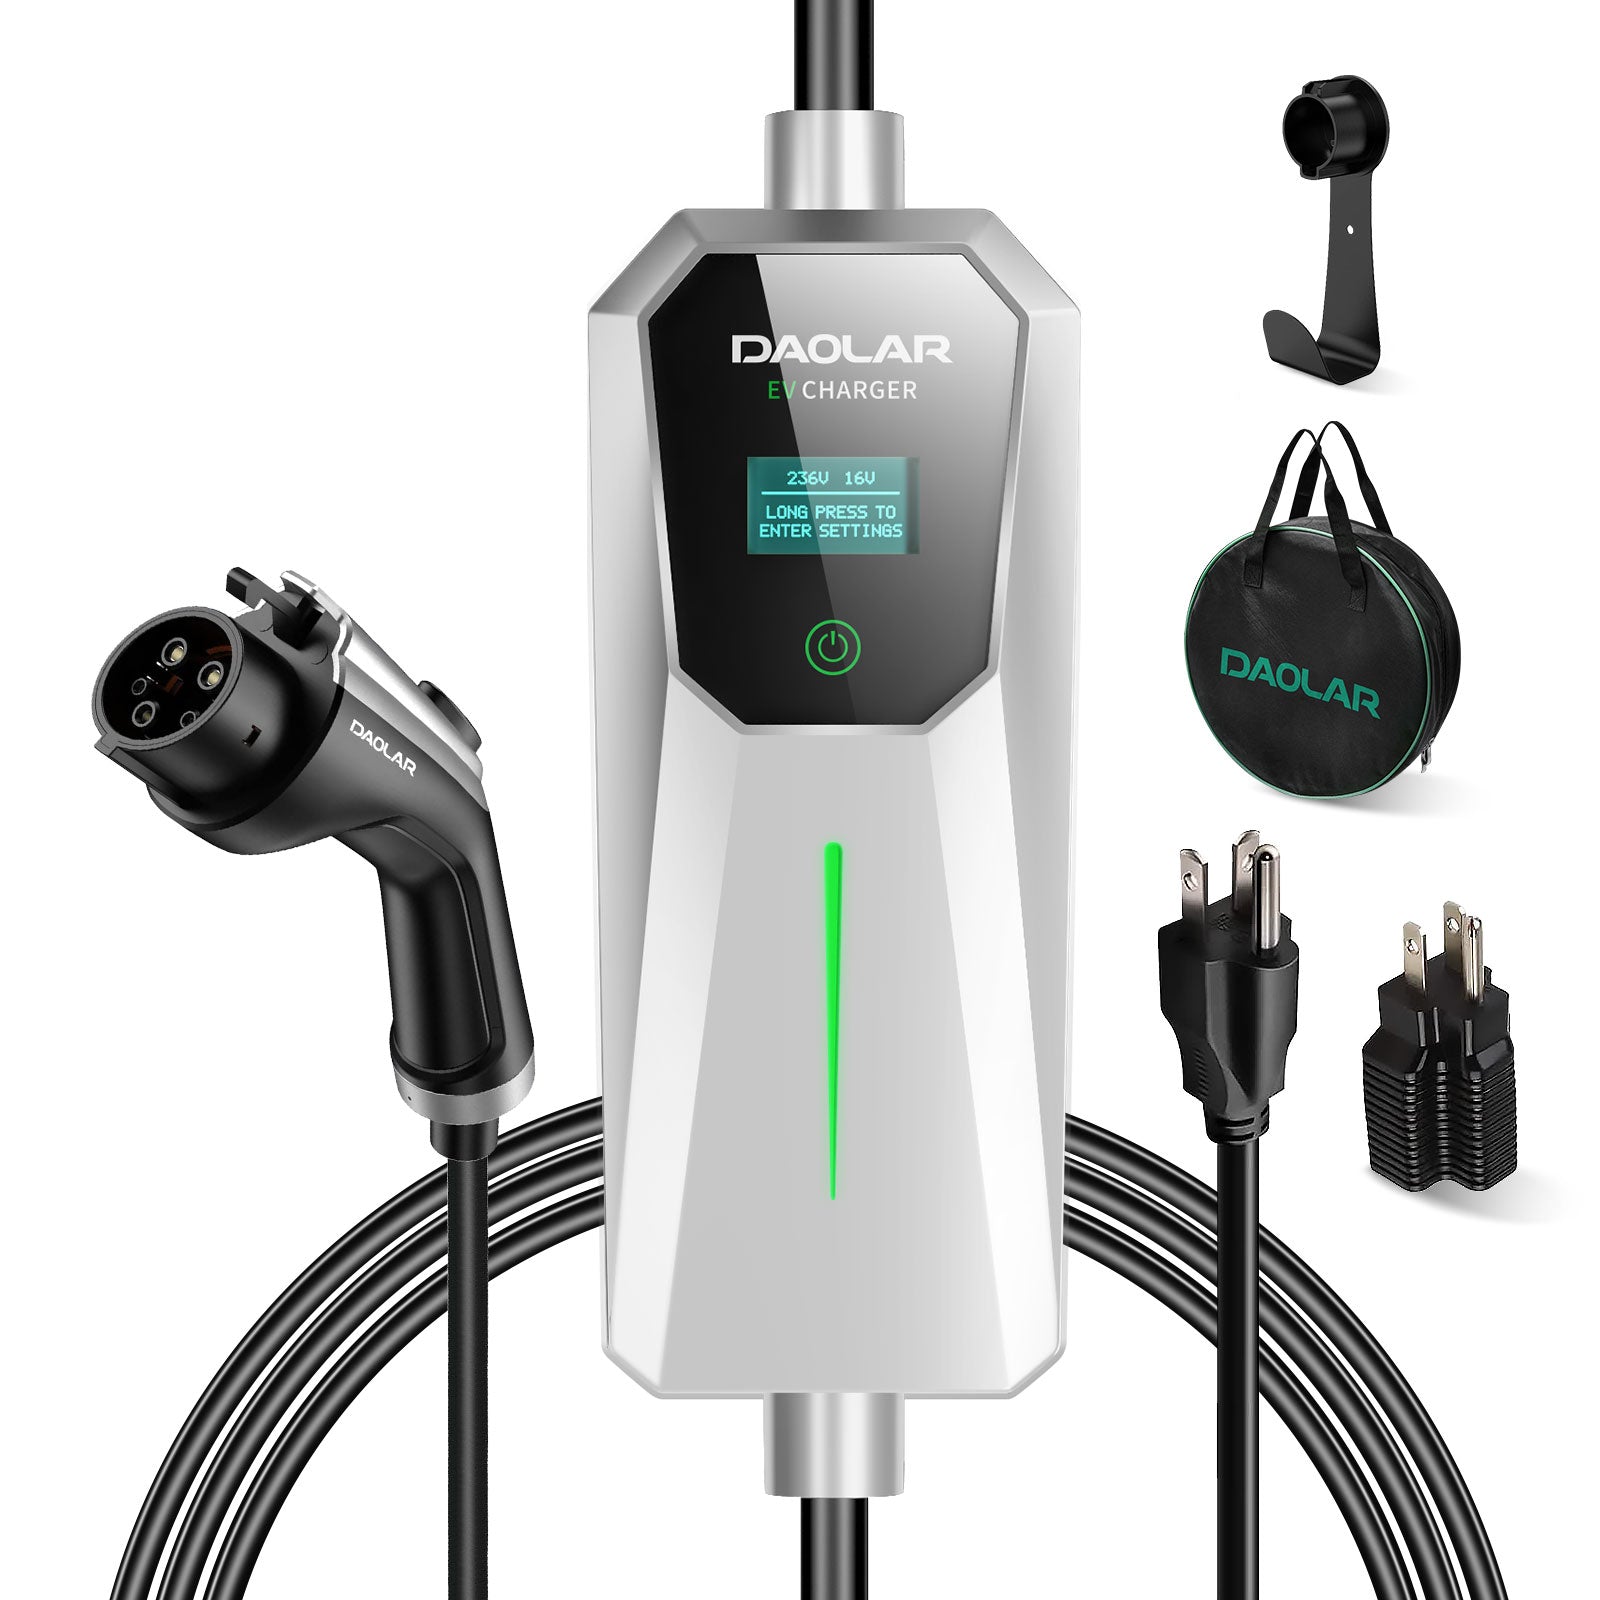 Daolar 8H Timing 3.5KW Portable EV Charger 16A J1772 Level 2